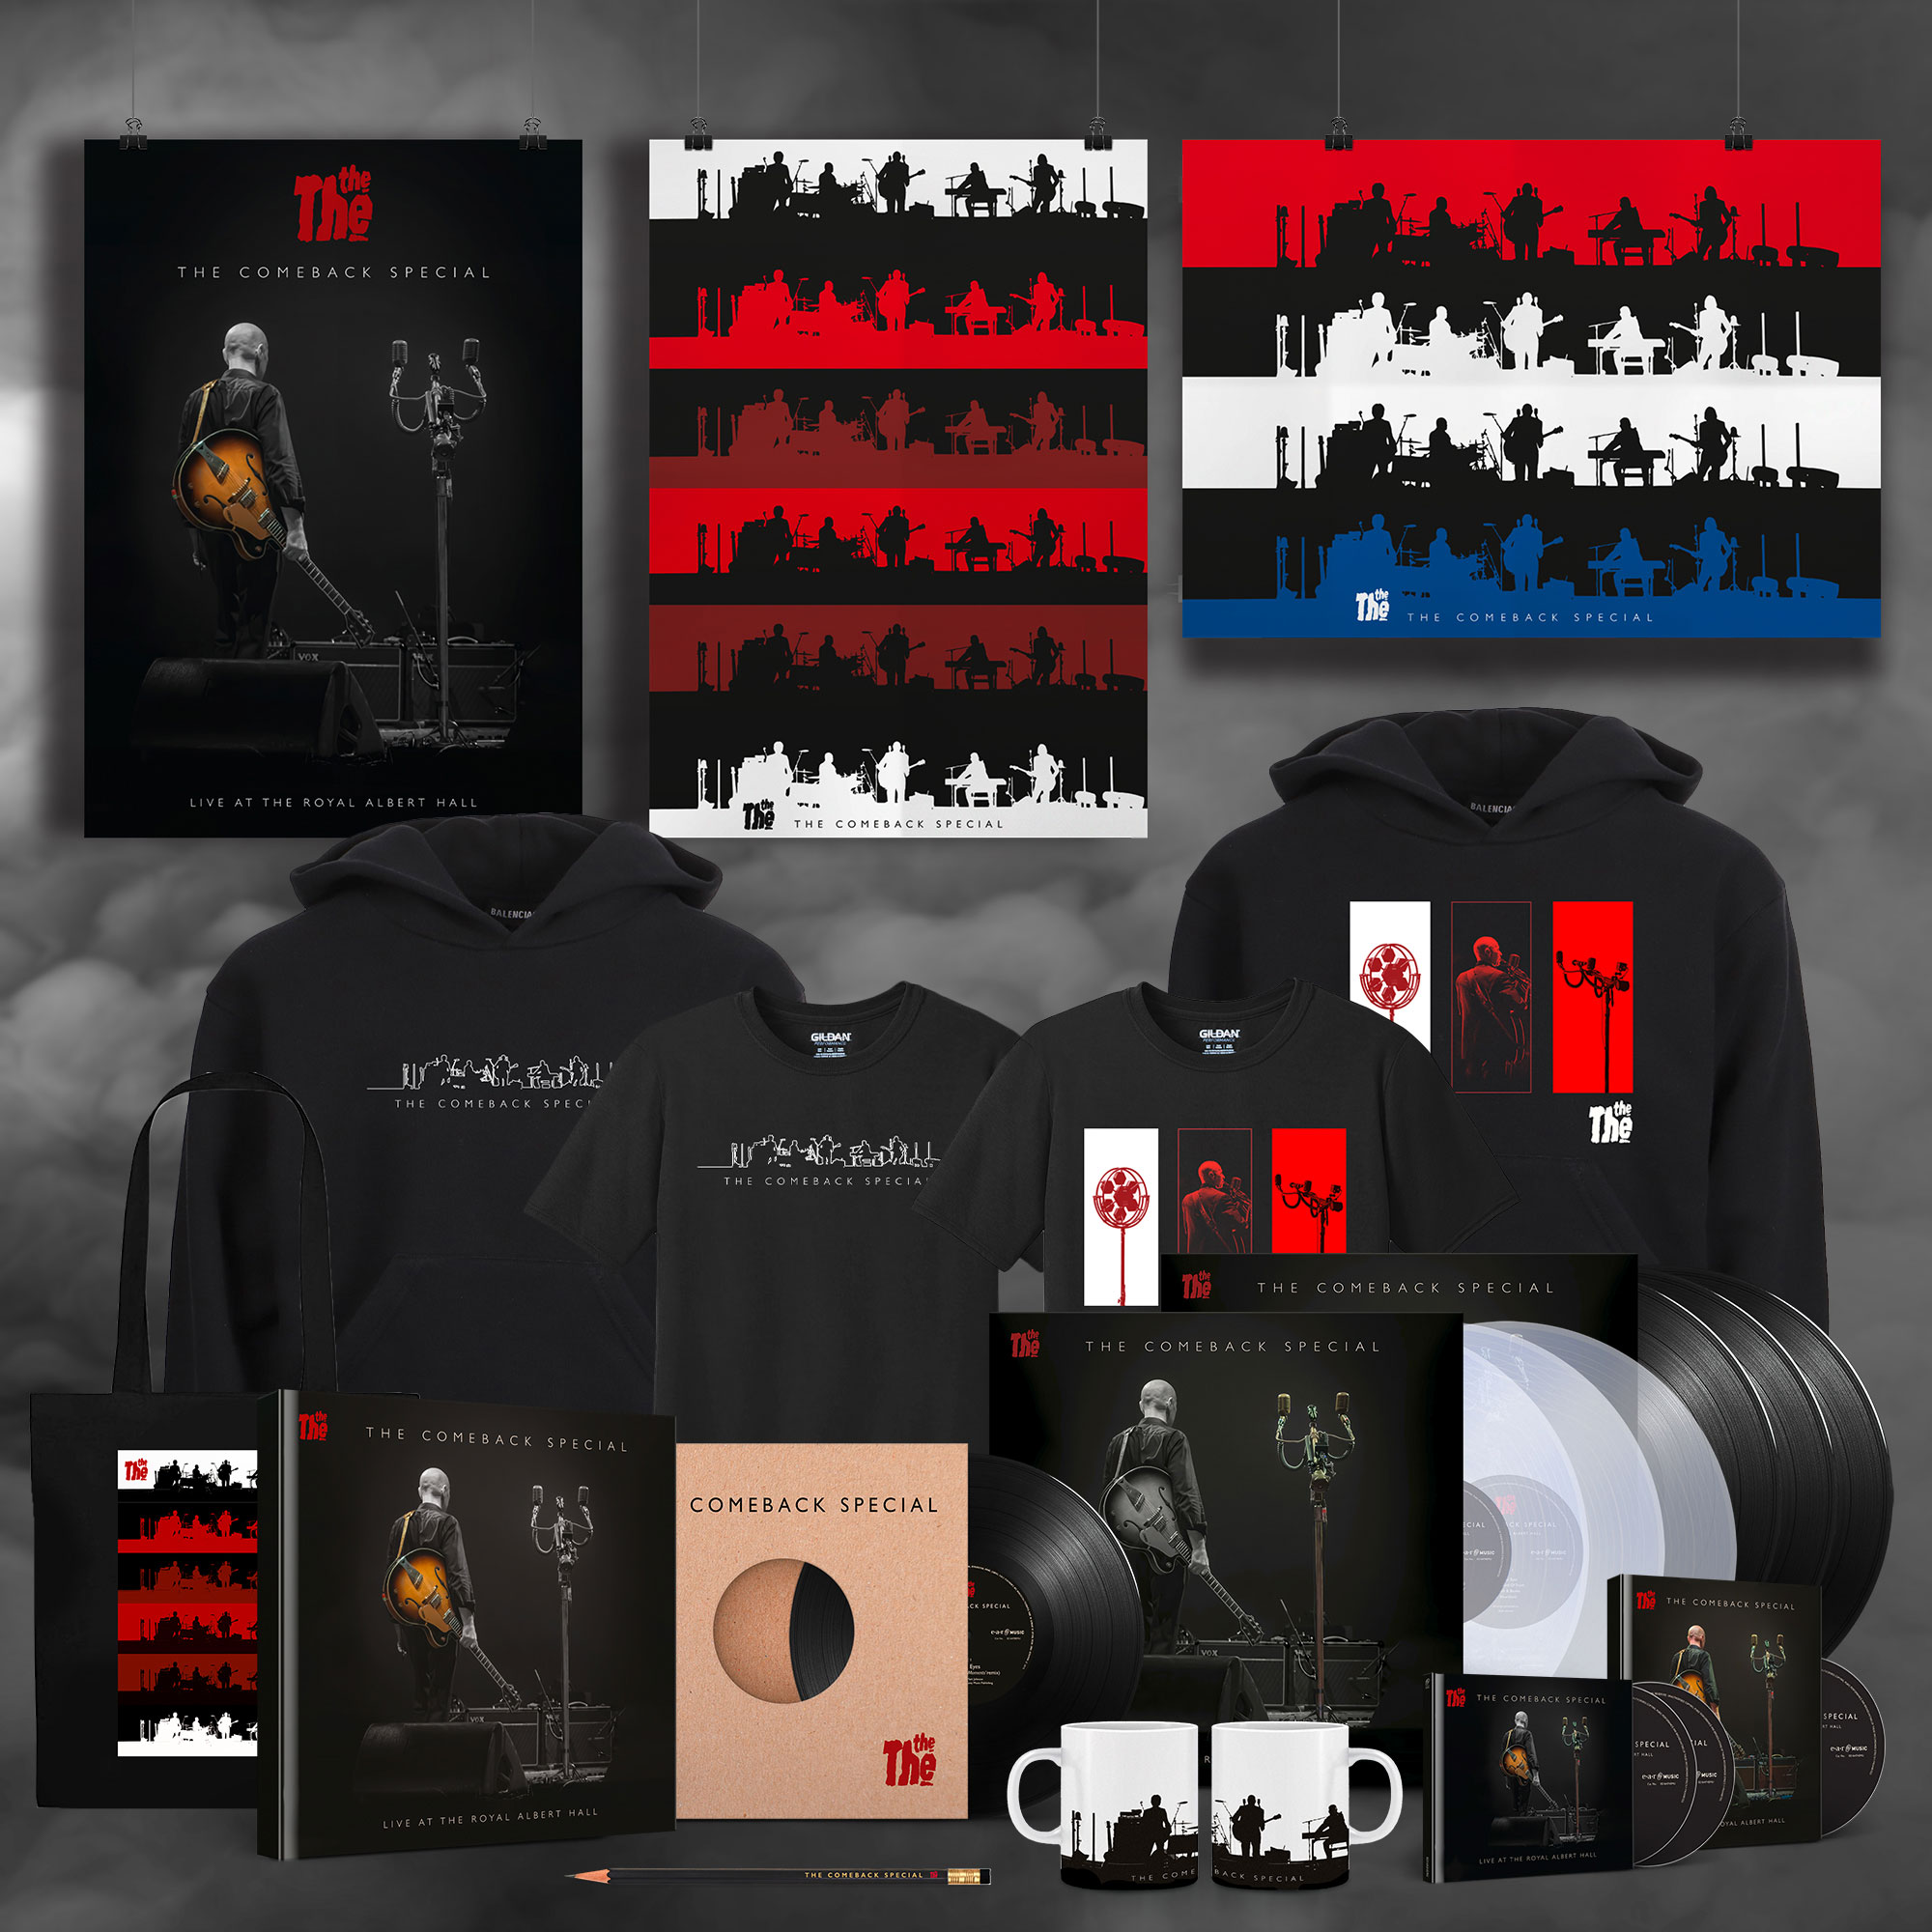 The The Merch Items